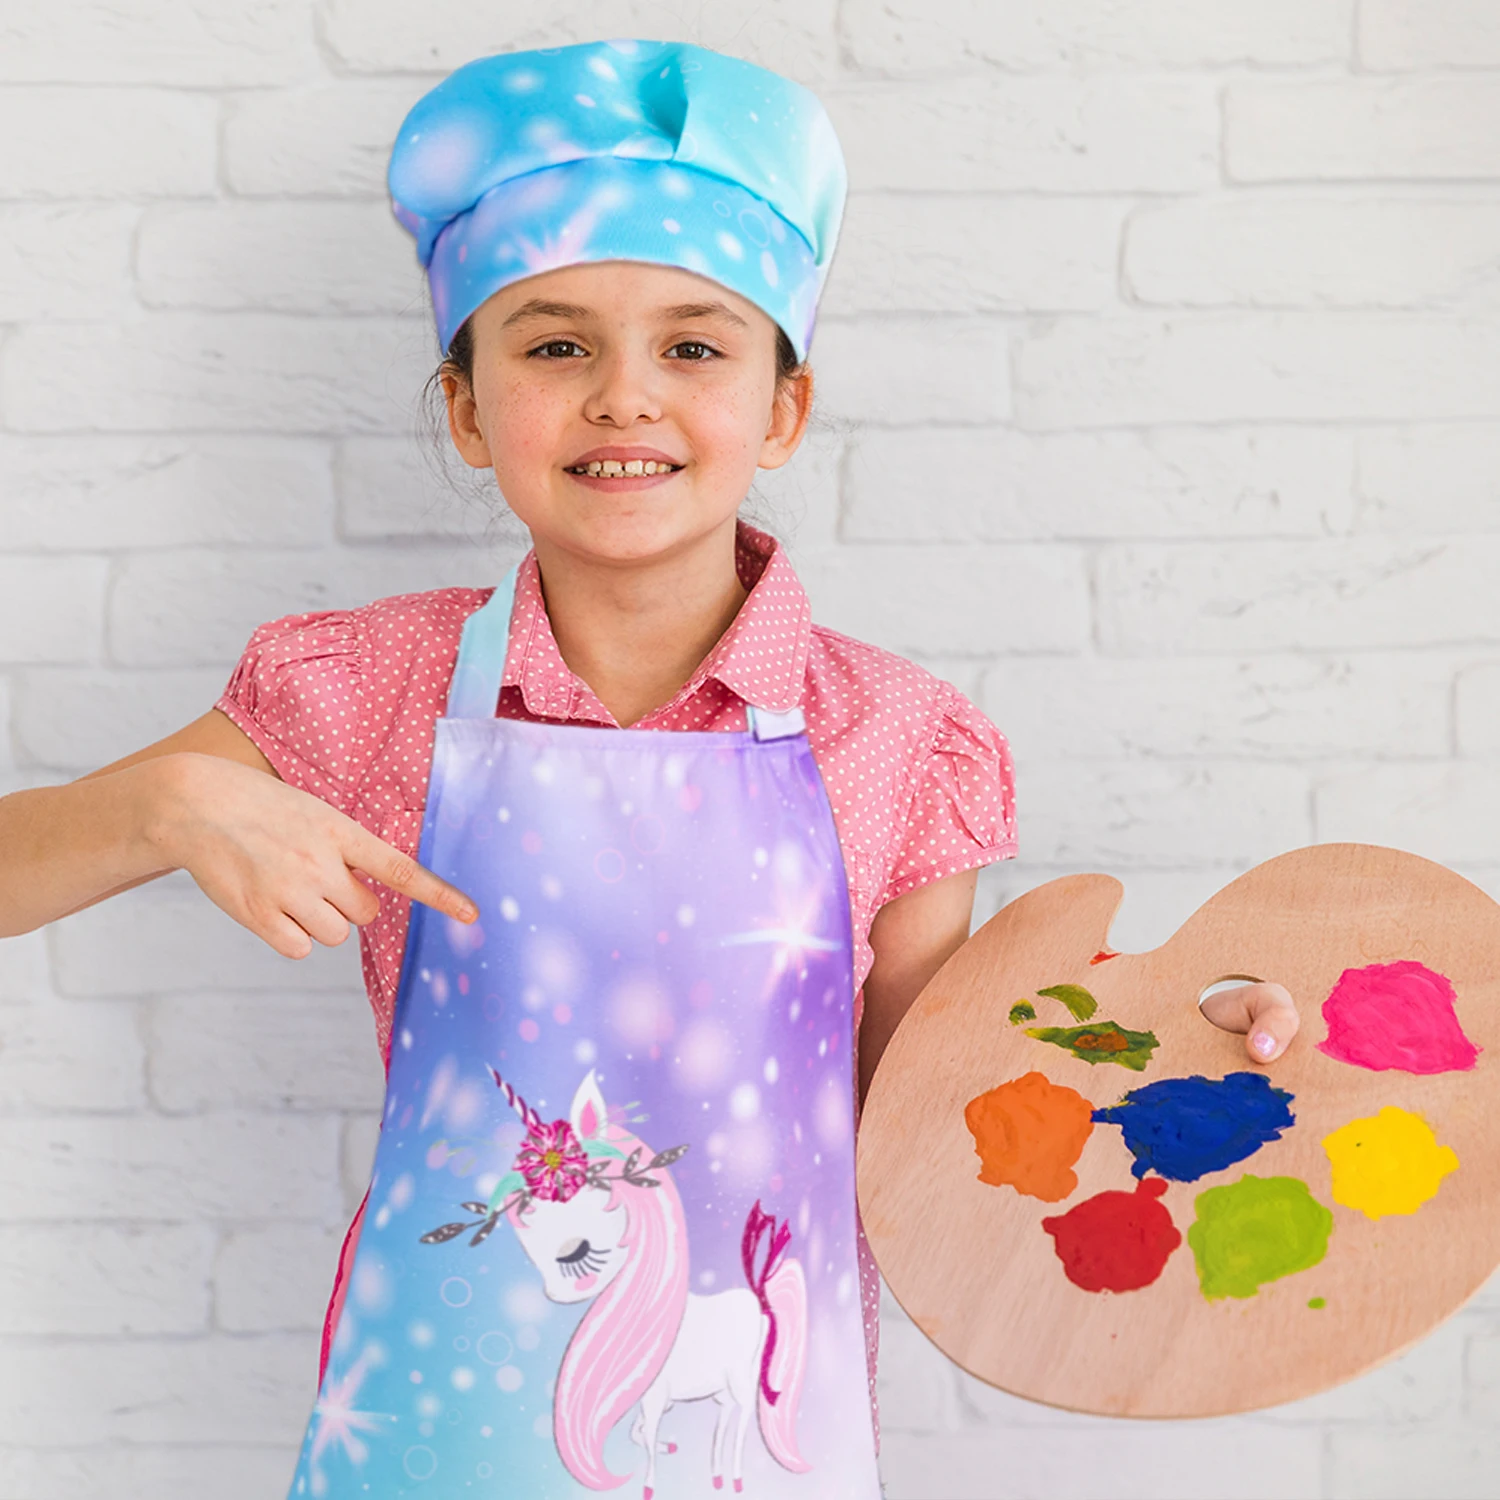 ICOSY Kids Apron for Girls Unicorn Cooking Apron Toddler Girl Donuts Kitchen Apron and Chef Hat Set with 2 Pockets 